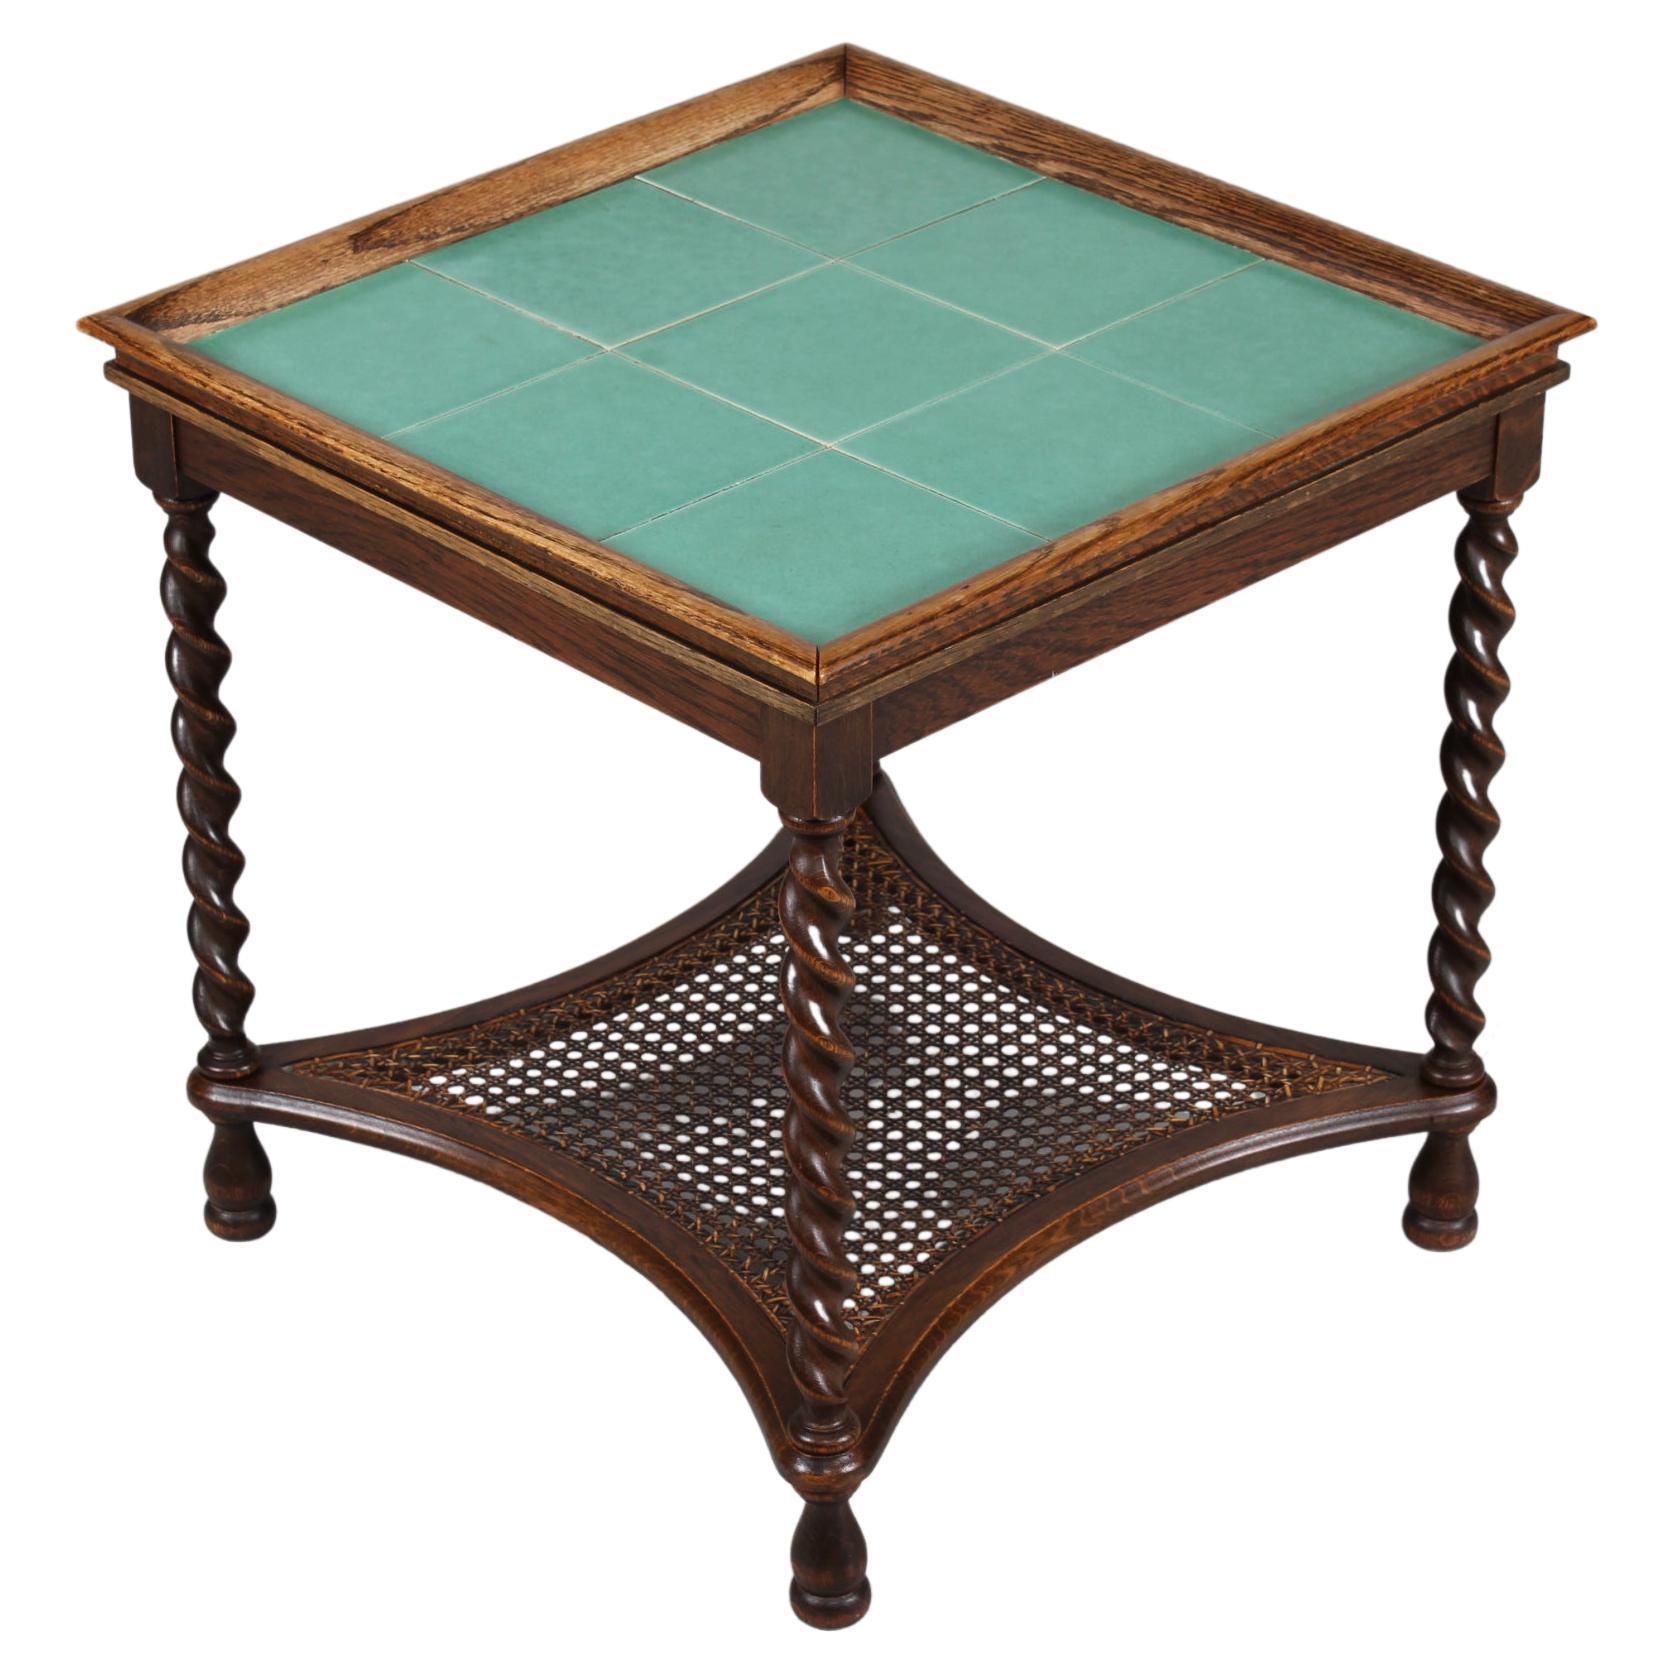 Glazed Art Deco Side Table with Jade Green Tiles by Danish Cabinetmaker, 1930-1940s For Sale